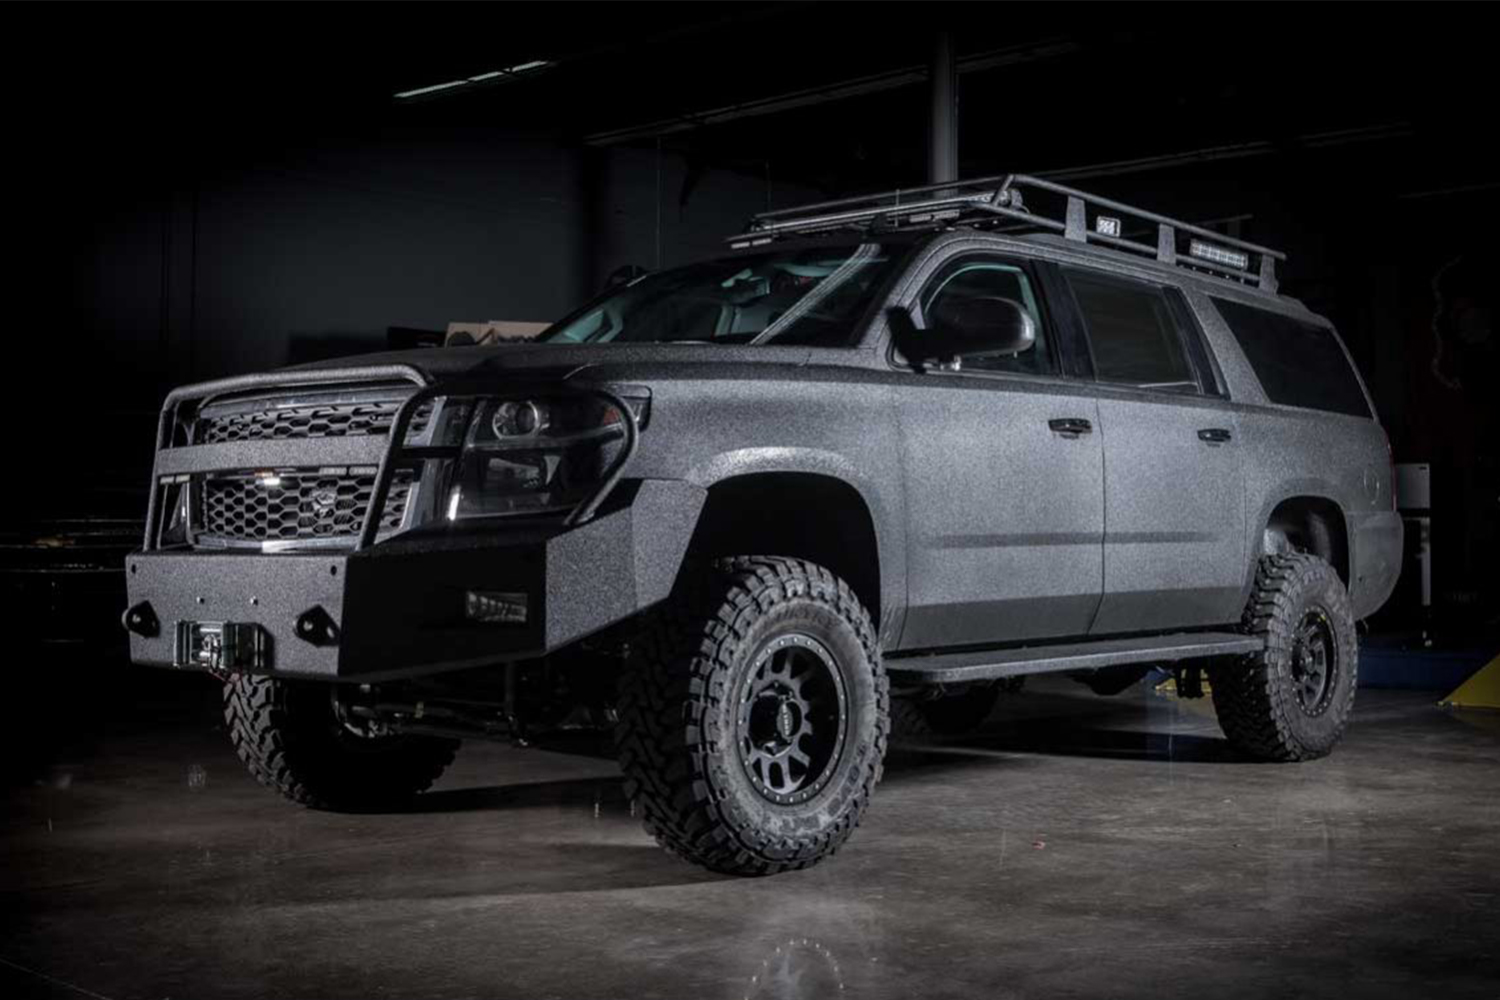 Armored Group's Armored Tactical SWAT Suburban